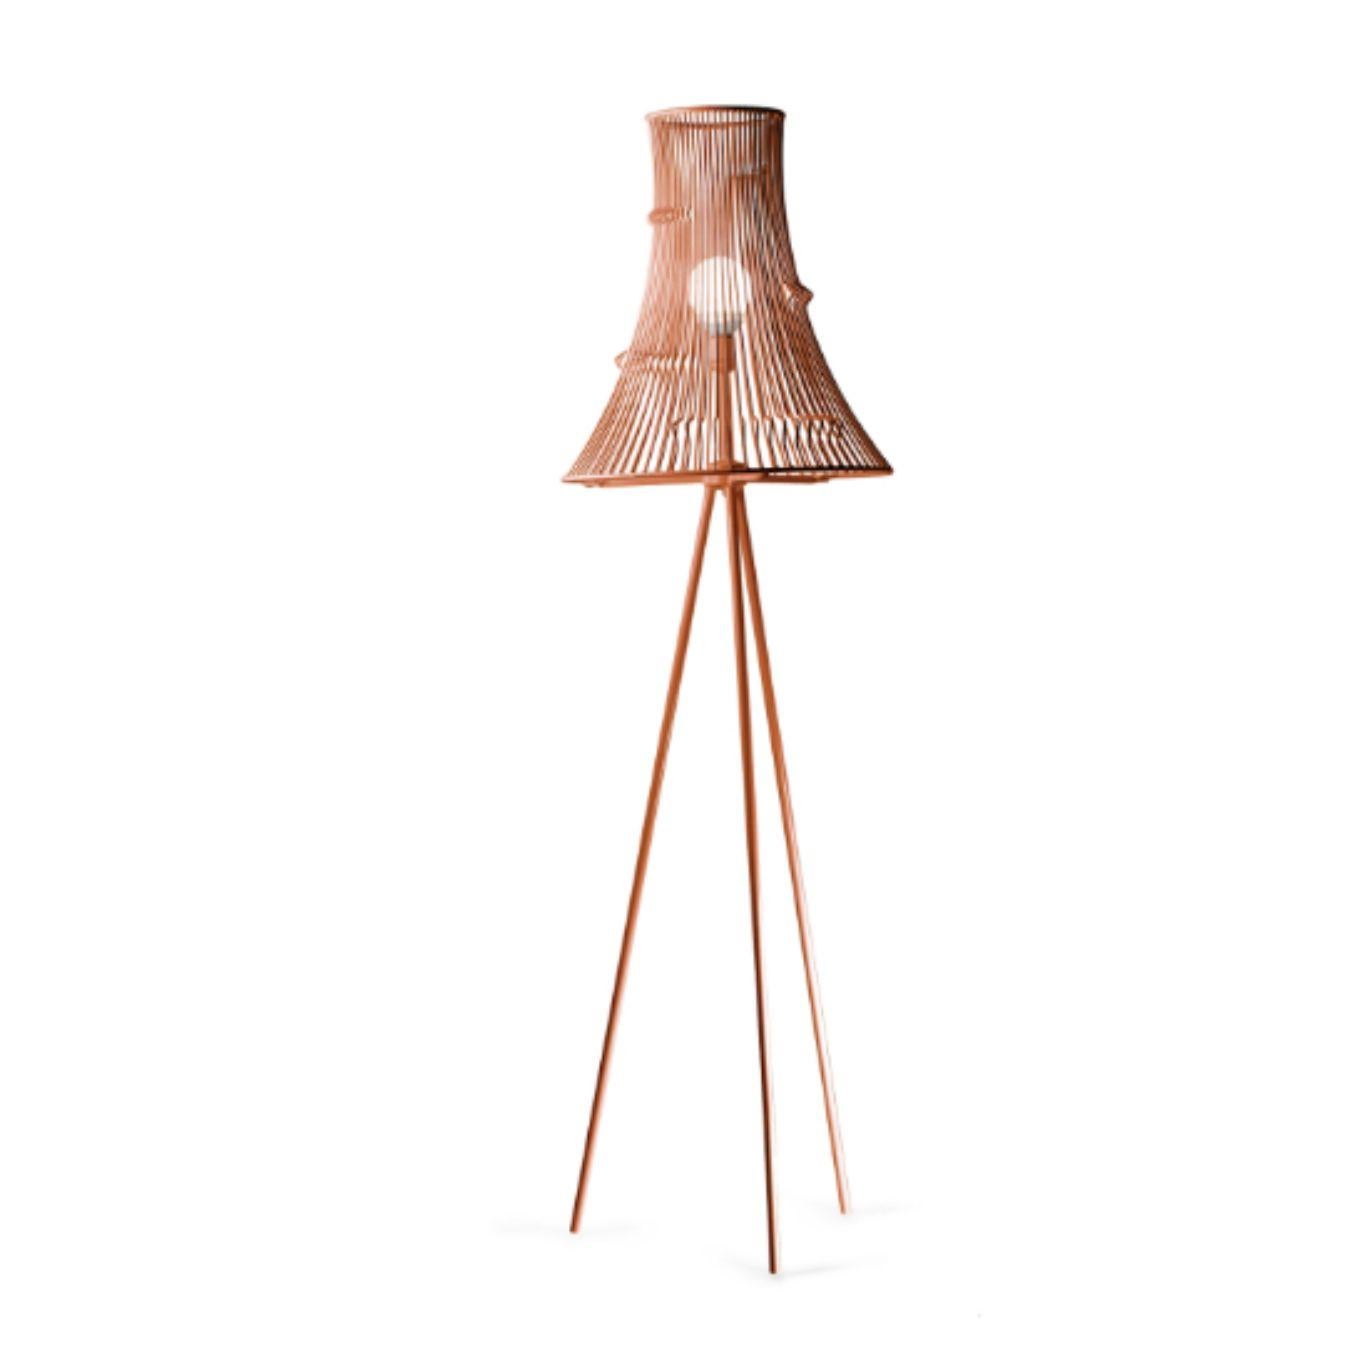 Salmon extrude floor lamp by Dooq.
Dimensions: W 50 x D 50 x H 175 cm.
Materials: lacquered metal, polished or brushed metal.
Also available in different colors and materials. 

Information:
230V/50Hz
E27/1x20W LED
120V/60Hz
E26/1x15W LED
bulb not